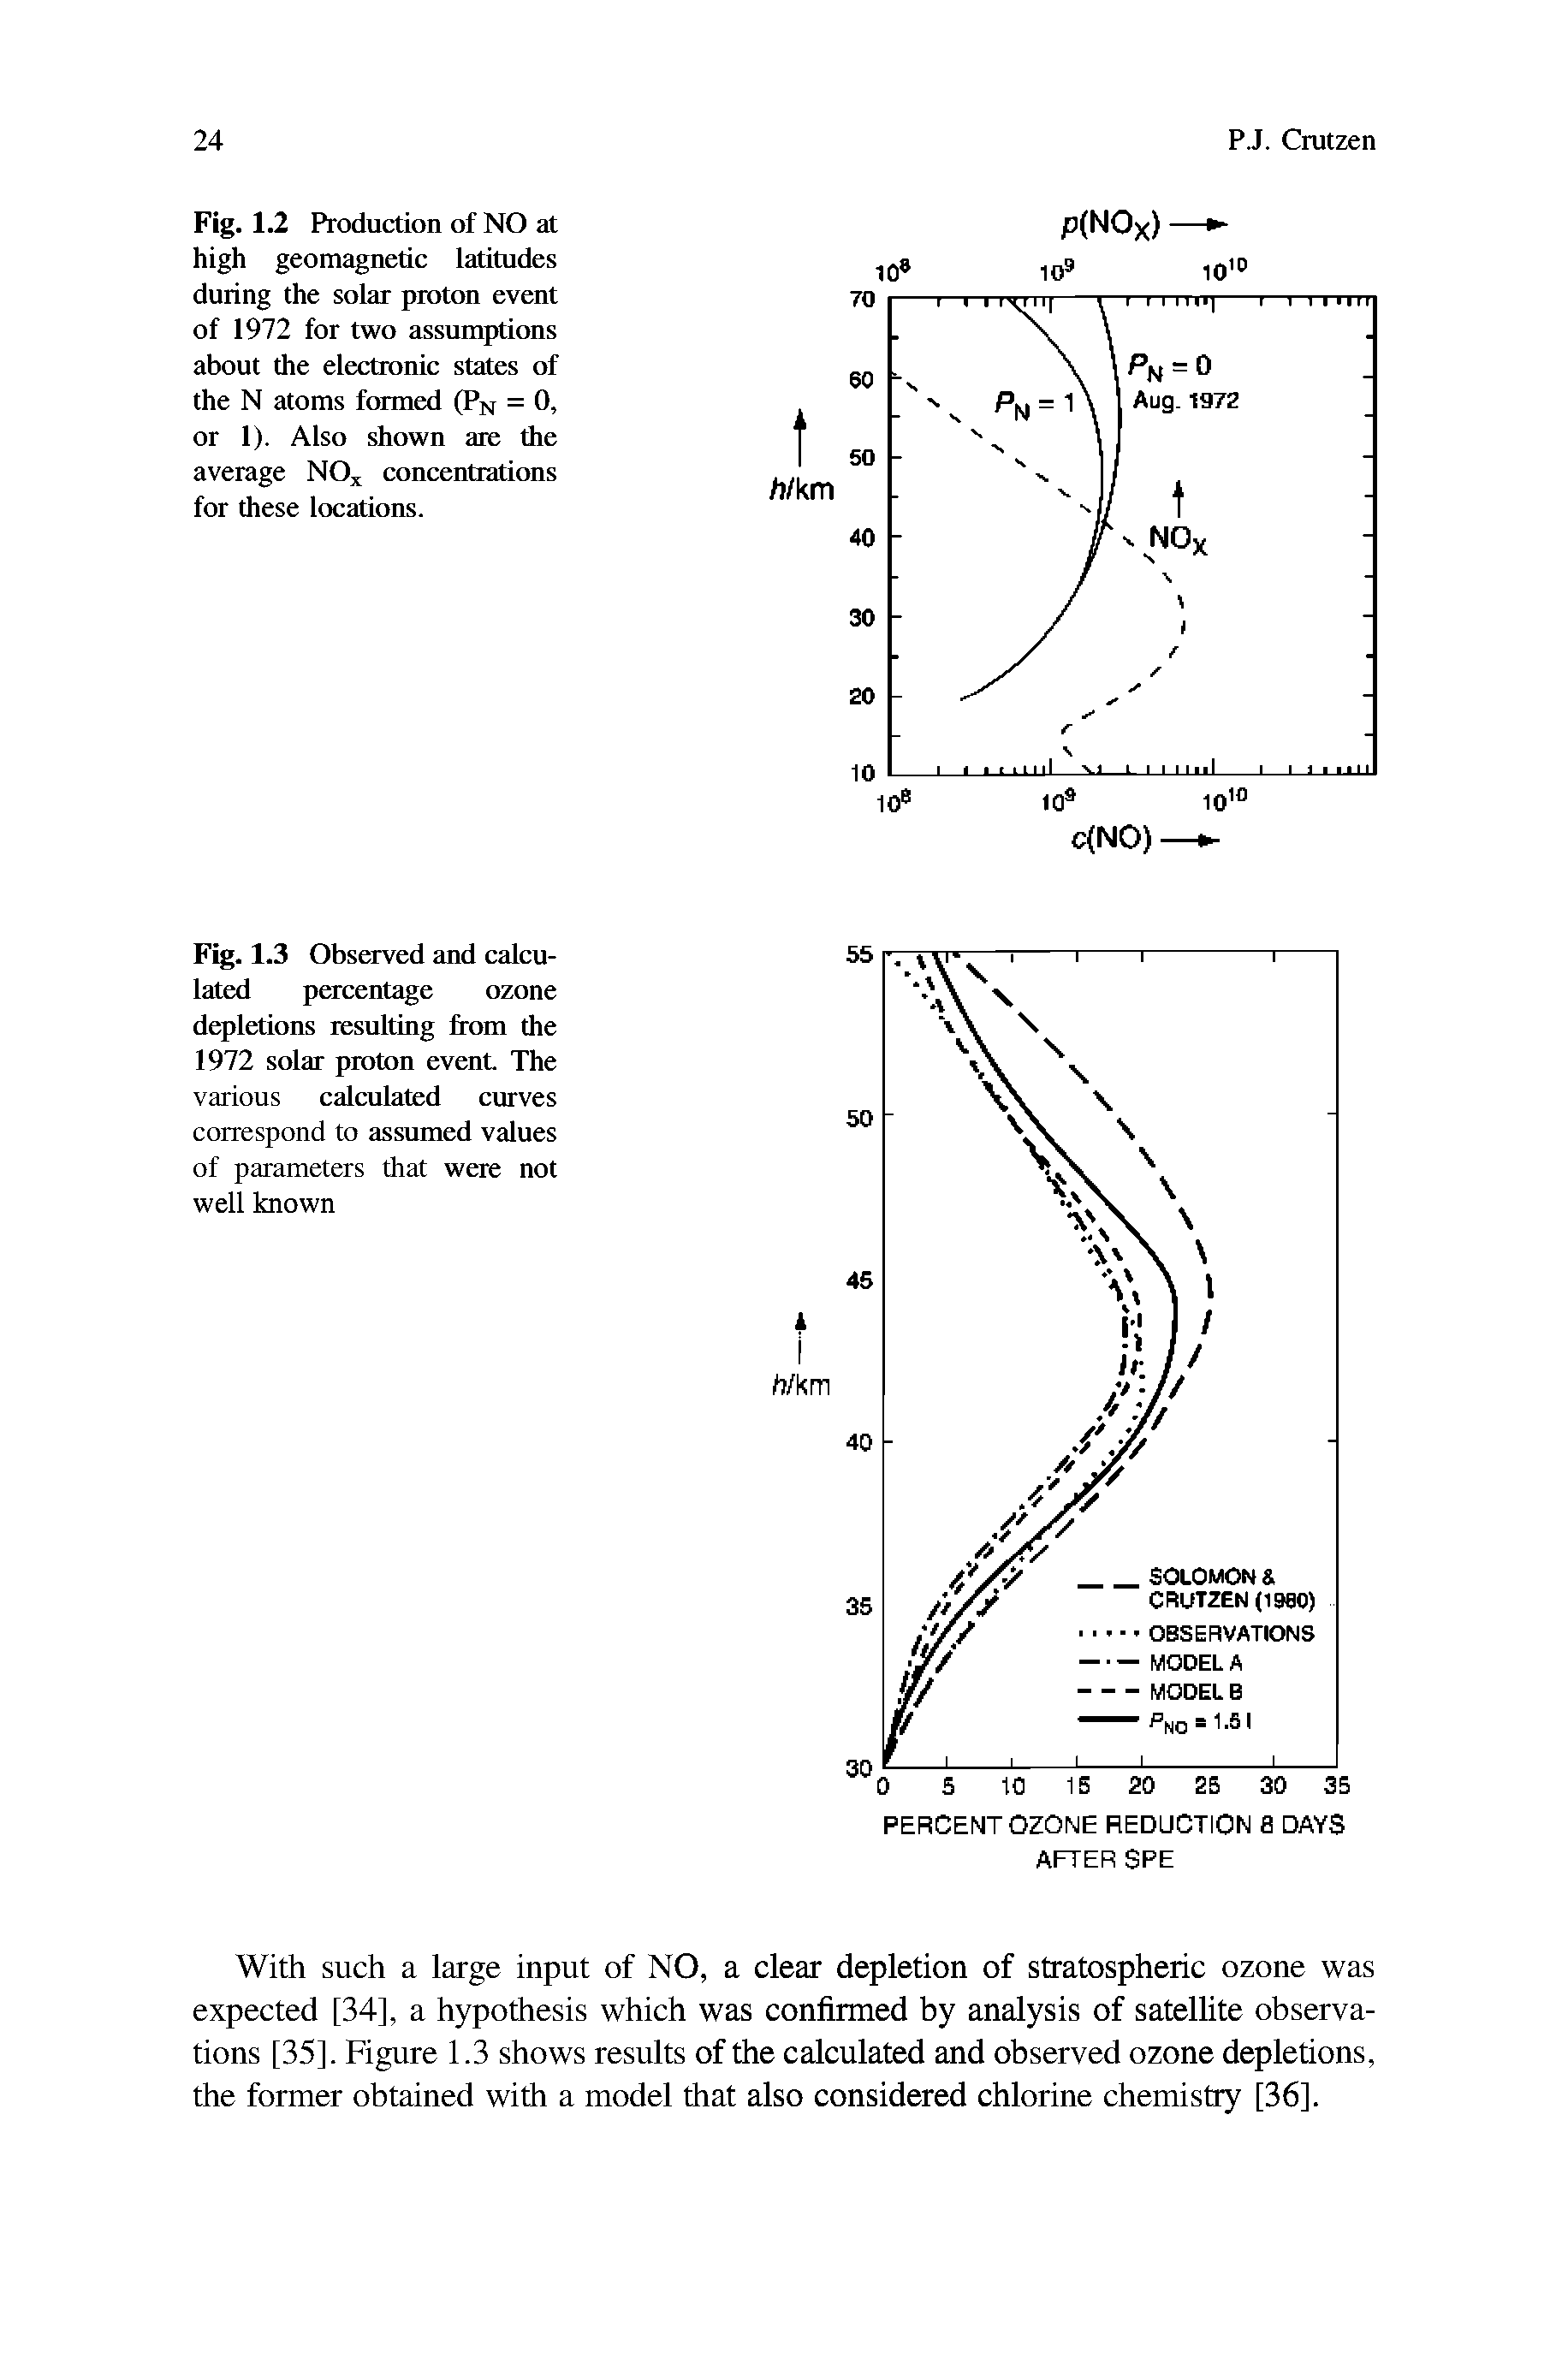 Fig. 1.3 Observed and calculated percentage ozone depletions resulting from the 1972 solar proton event The various calculated curves correspond to assumed values of parameters that were not well known...